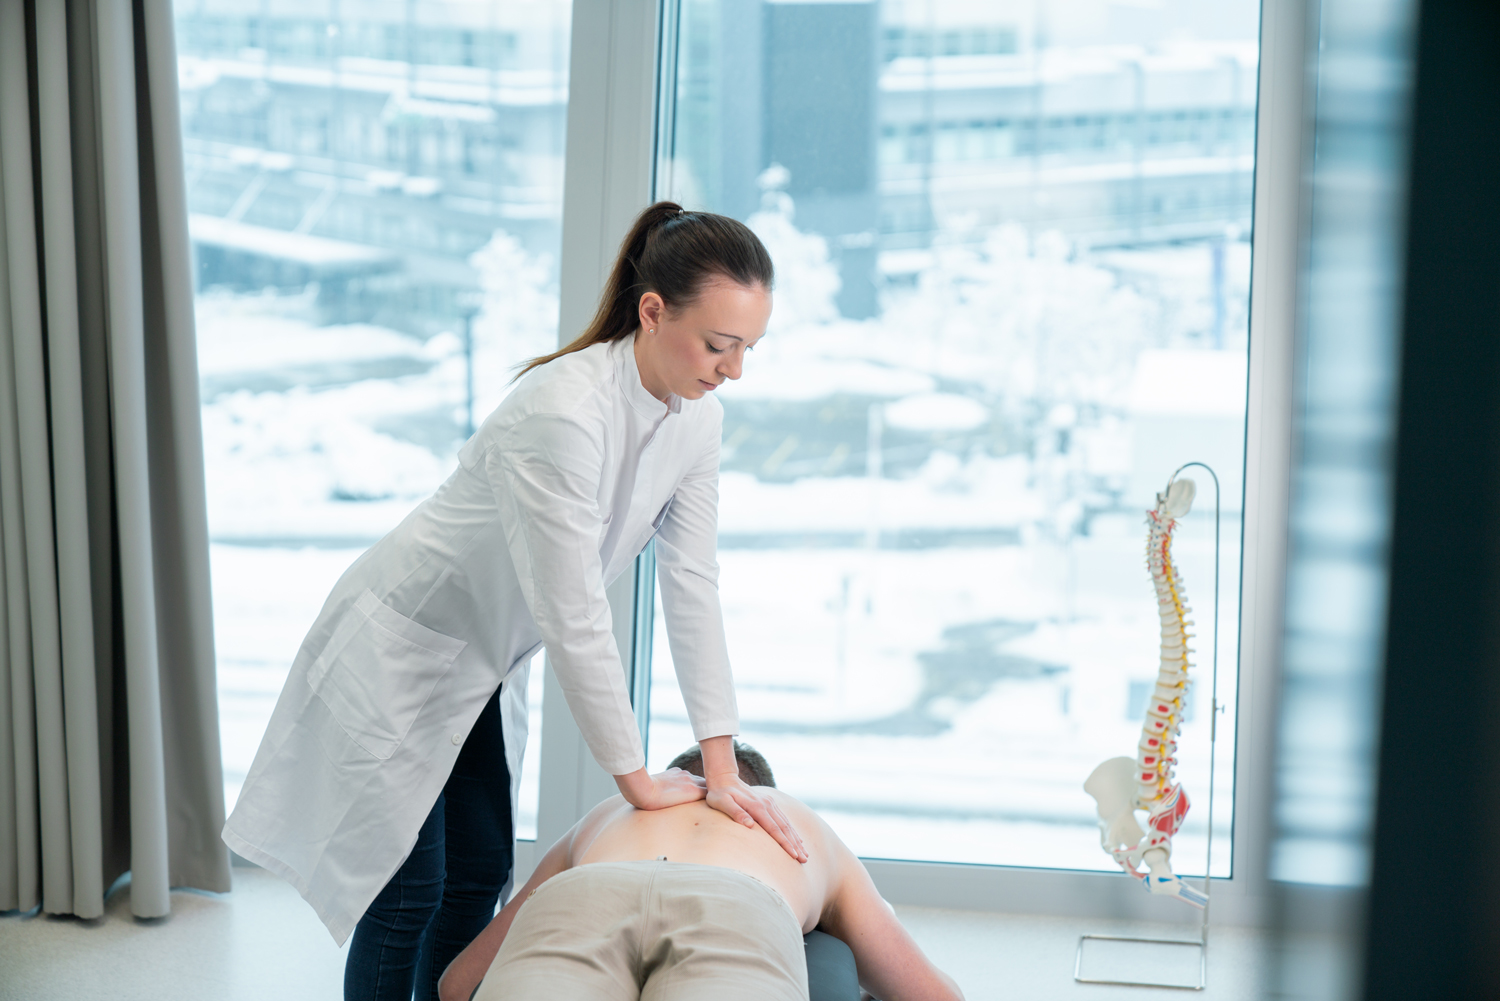 A chiropractor examines the back of a patient